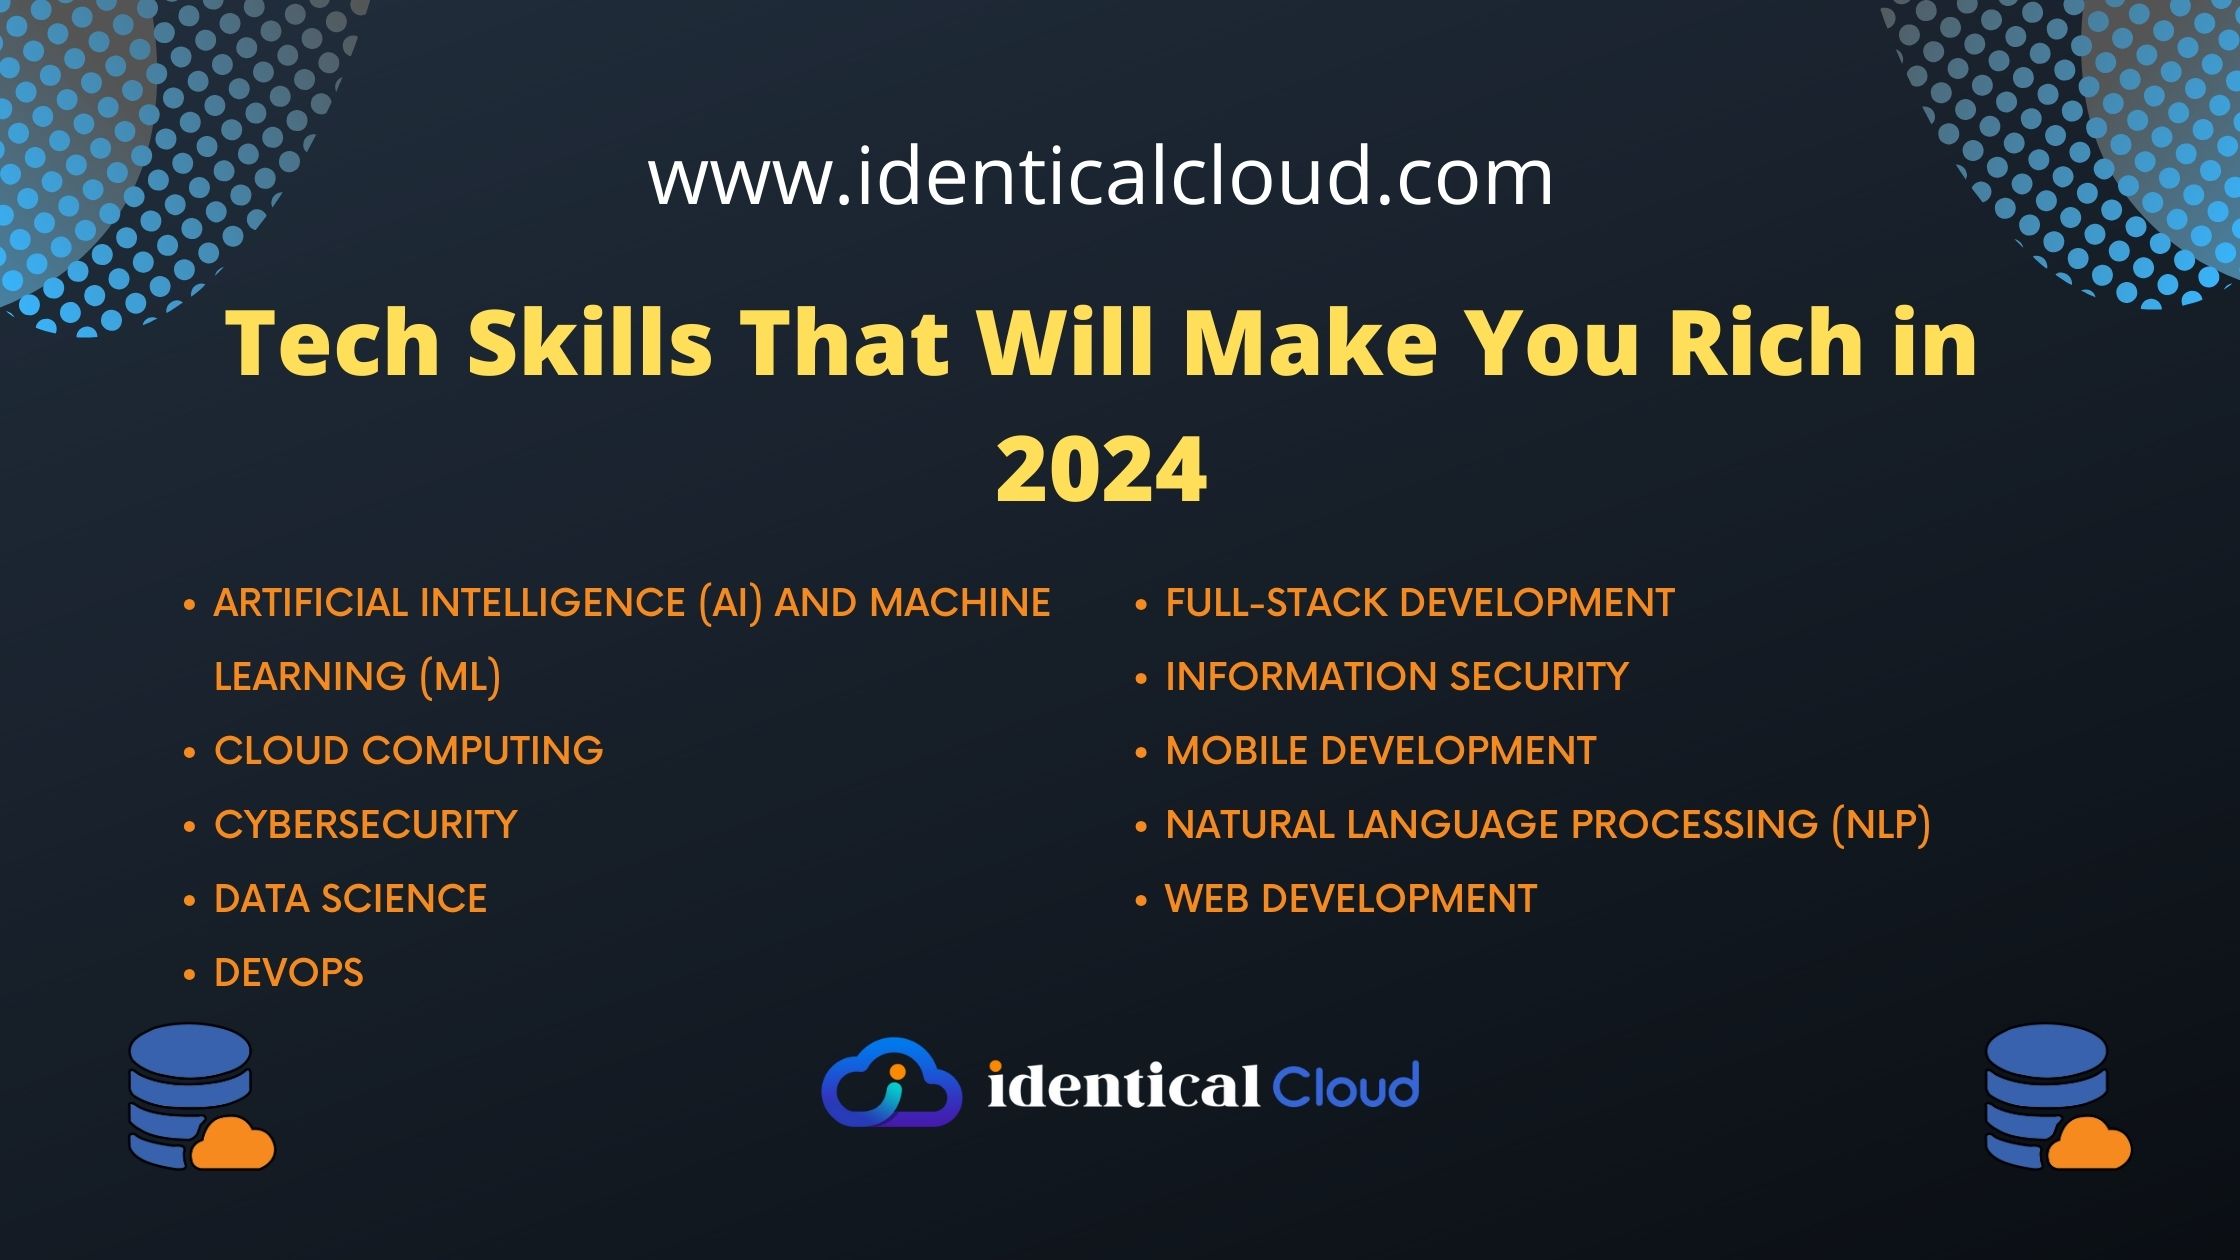 10 Tech Skills That Will Make You Rich in 2024 - identicalcloud.com